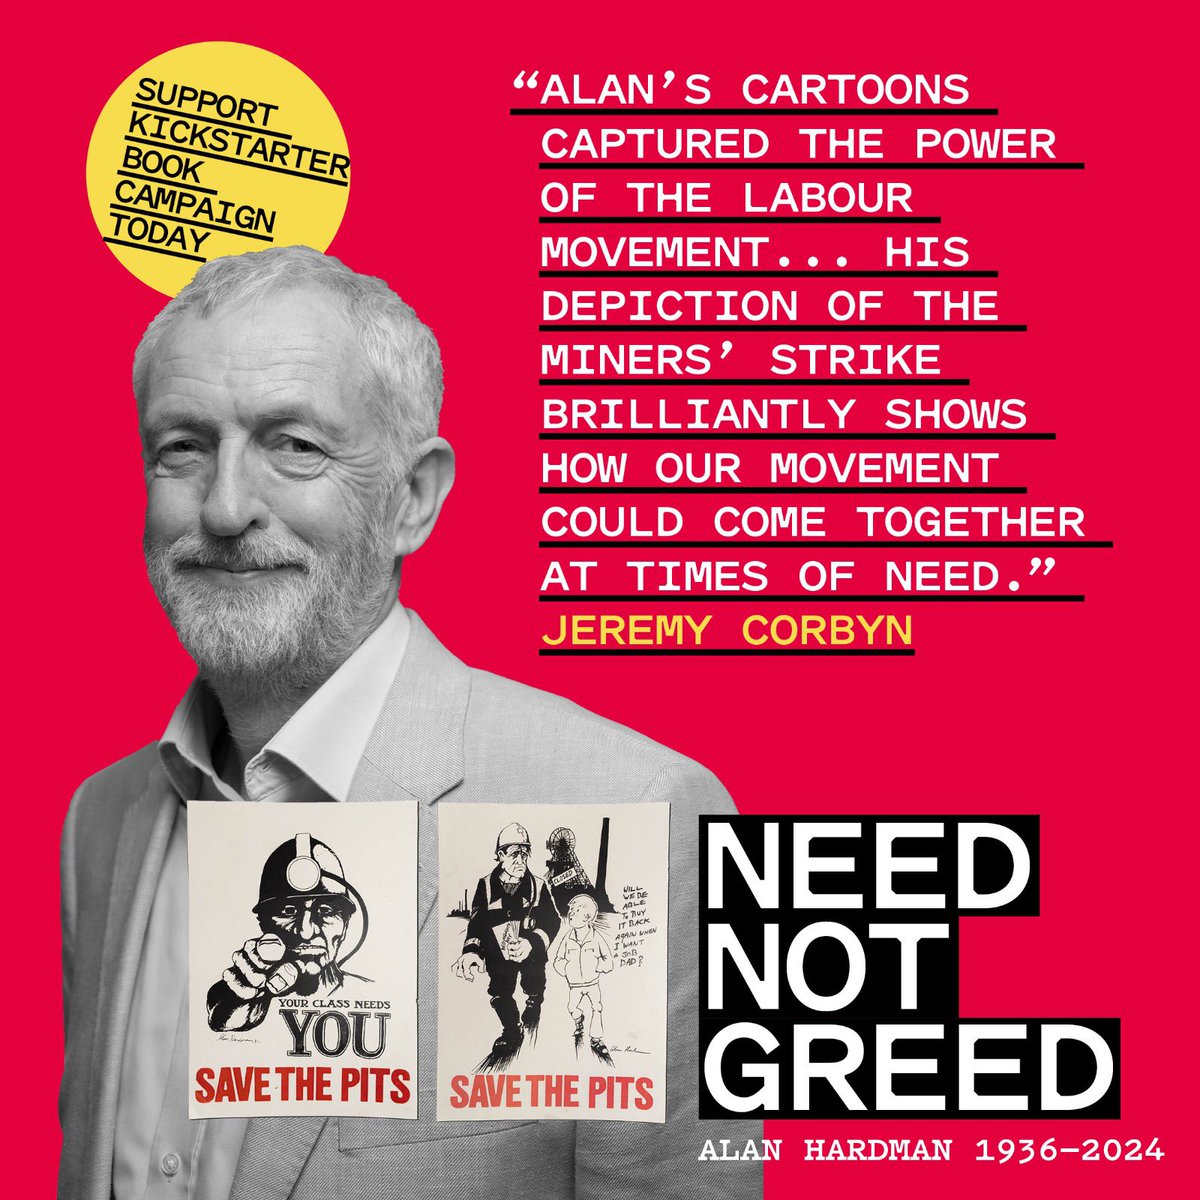 Alan Hardman is one of Britain’s greatest unsung political cartoonists. With your support, we can create a book that honours his enduring legacy. Support @bluecoatpress’s kickstarter campaign for Alan’s book — ‘Need not Greed’ — here: 1854.photo/NeedNotGreed